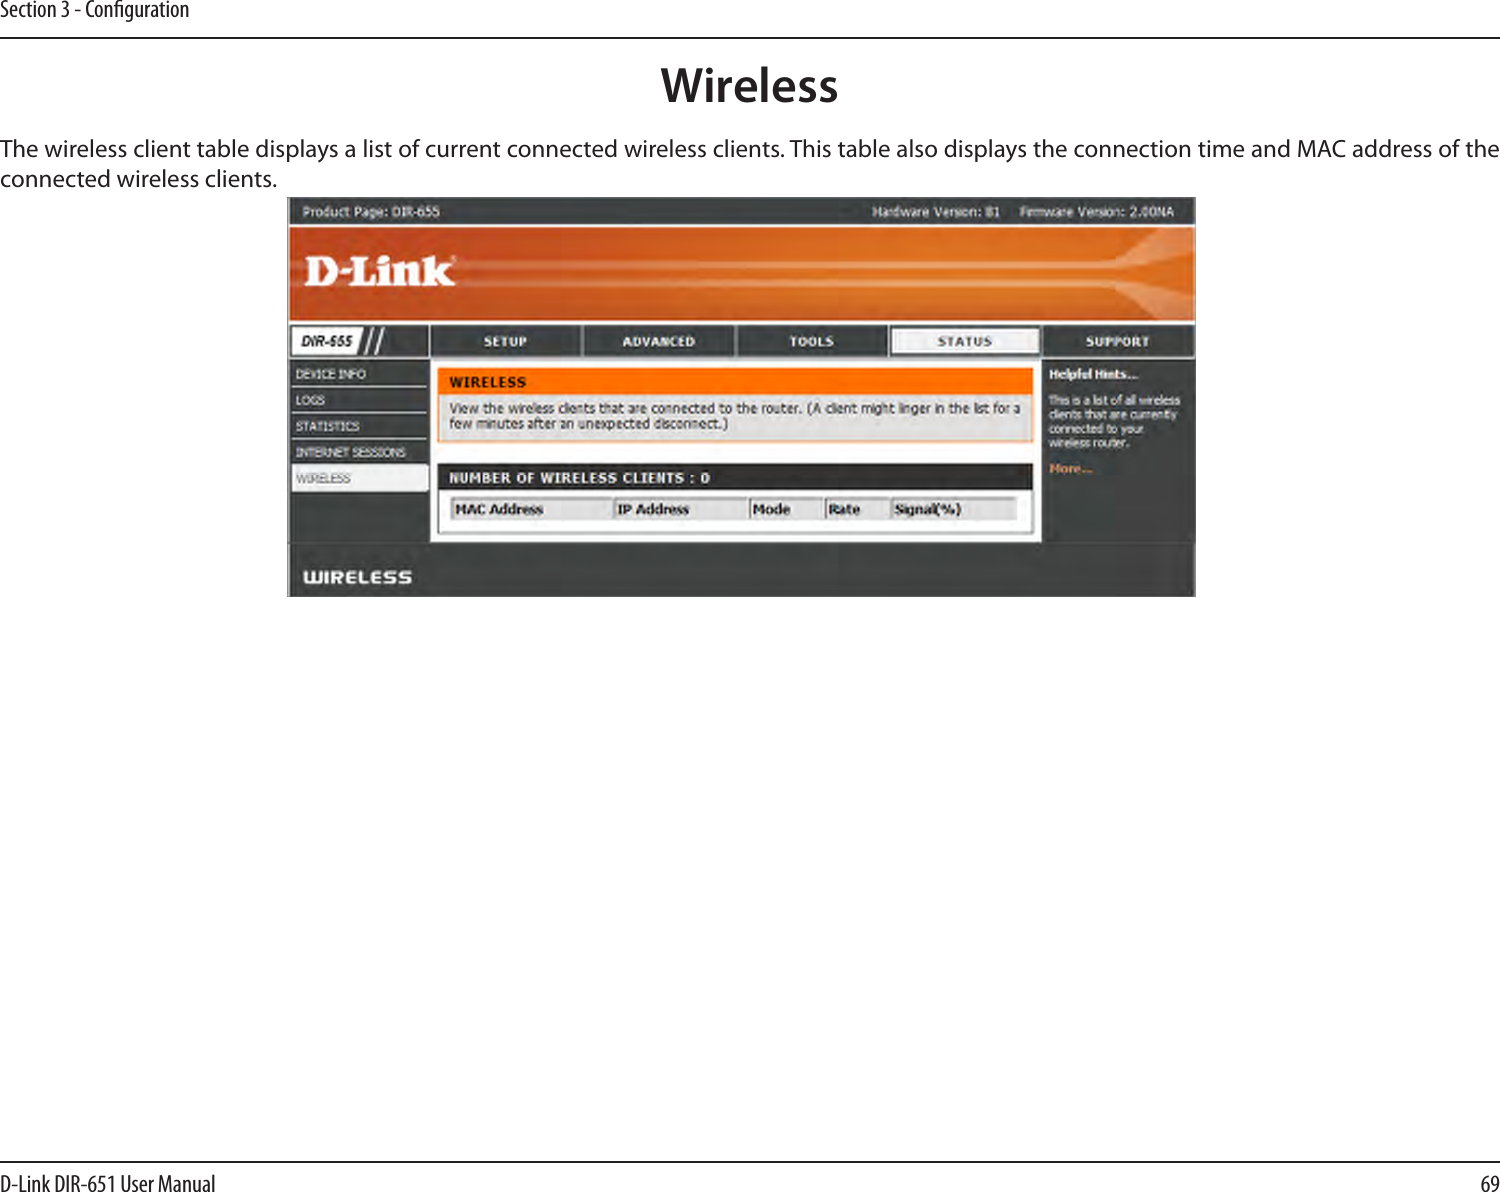 69D-Link DIR-651 User ManualSection 3 - CongurationThe wireless client table displays a list of current connected wireless clients. This table also displays the connection time and MAC address of the connected wireless clients.Wireless